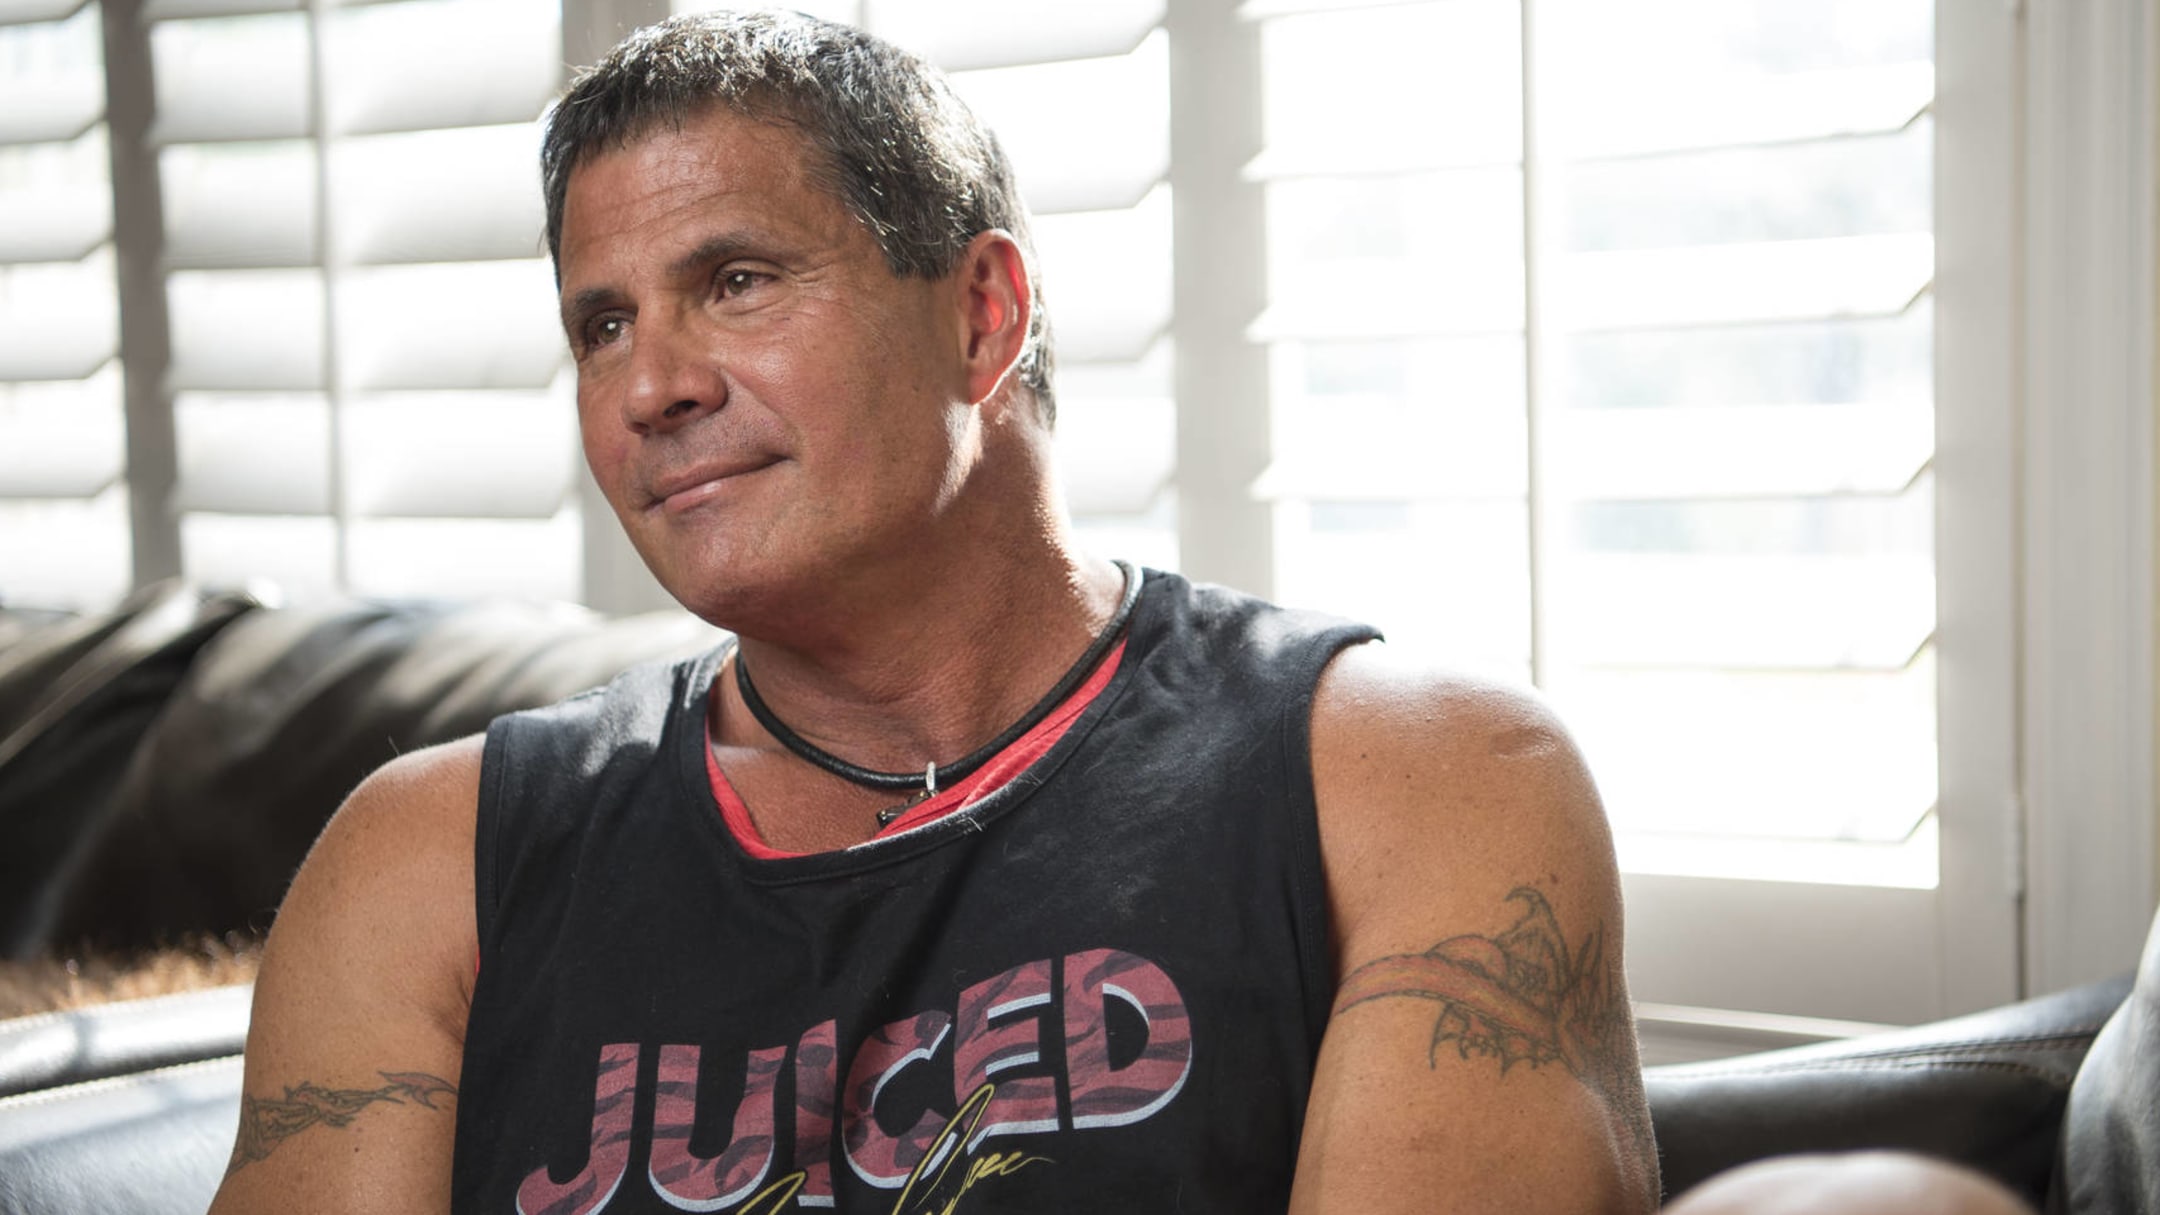 Jose Canseco attracts fans to Aldergrove tournament - The Abbotsford News